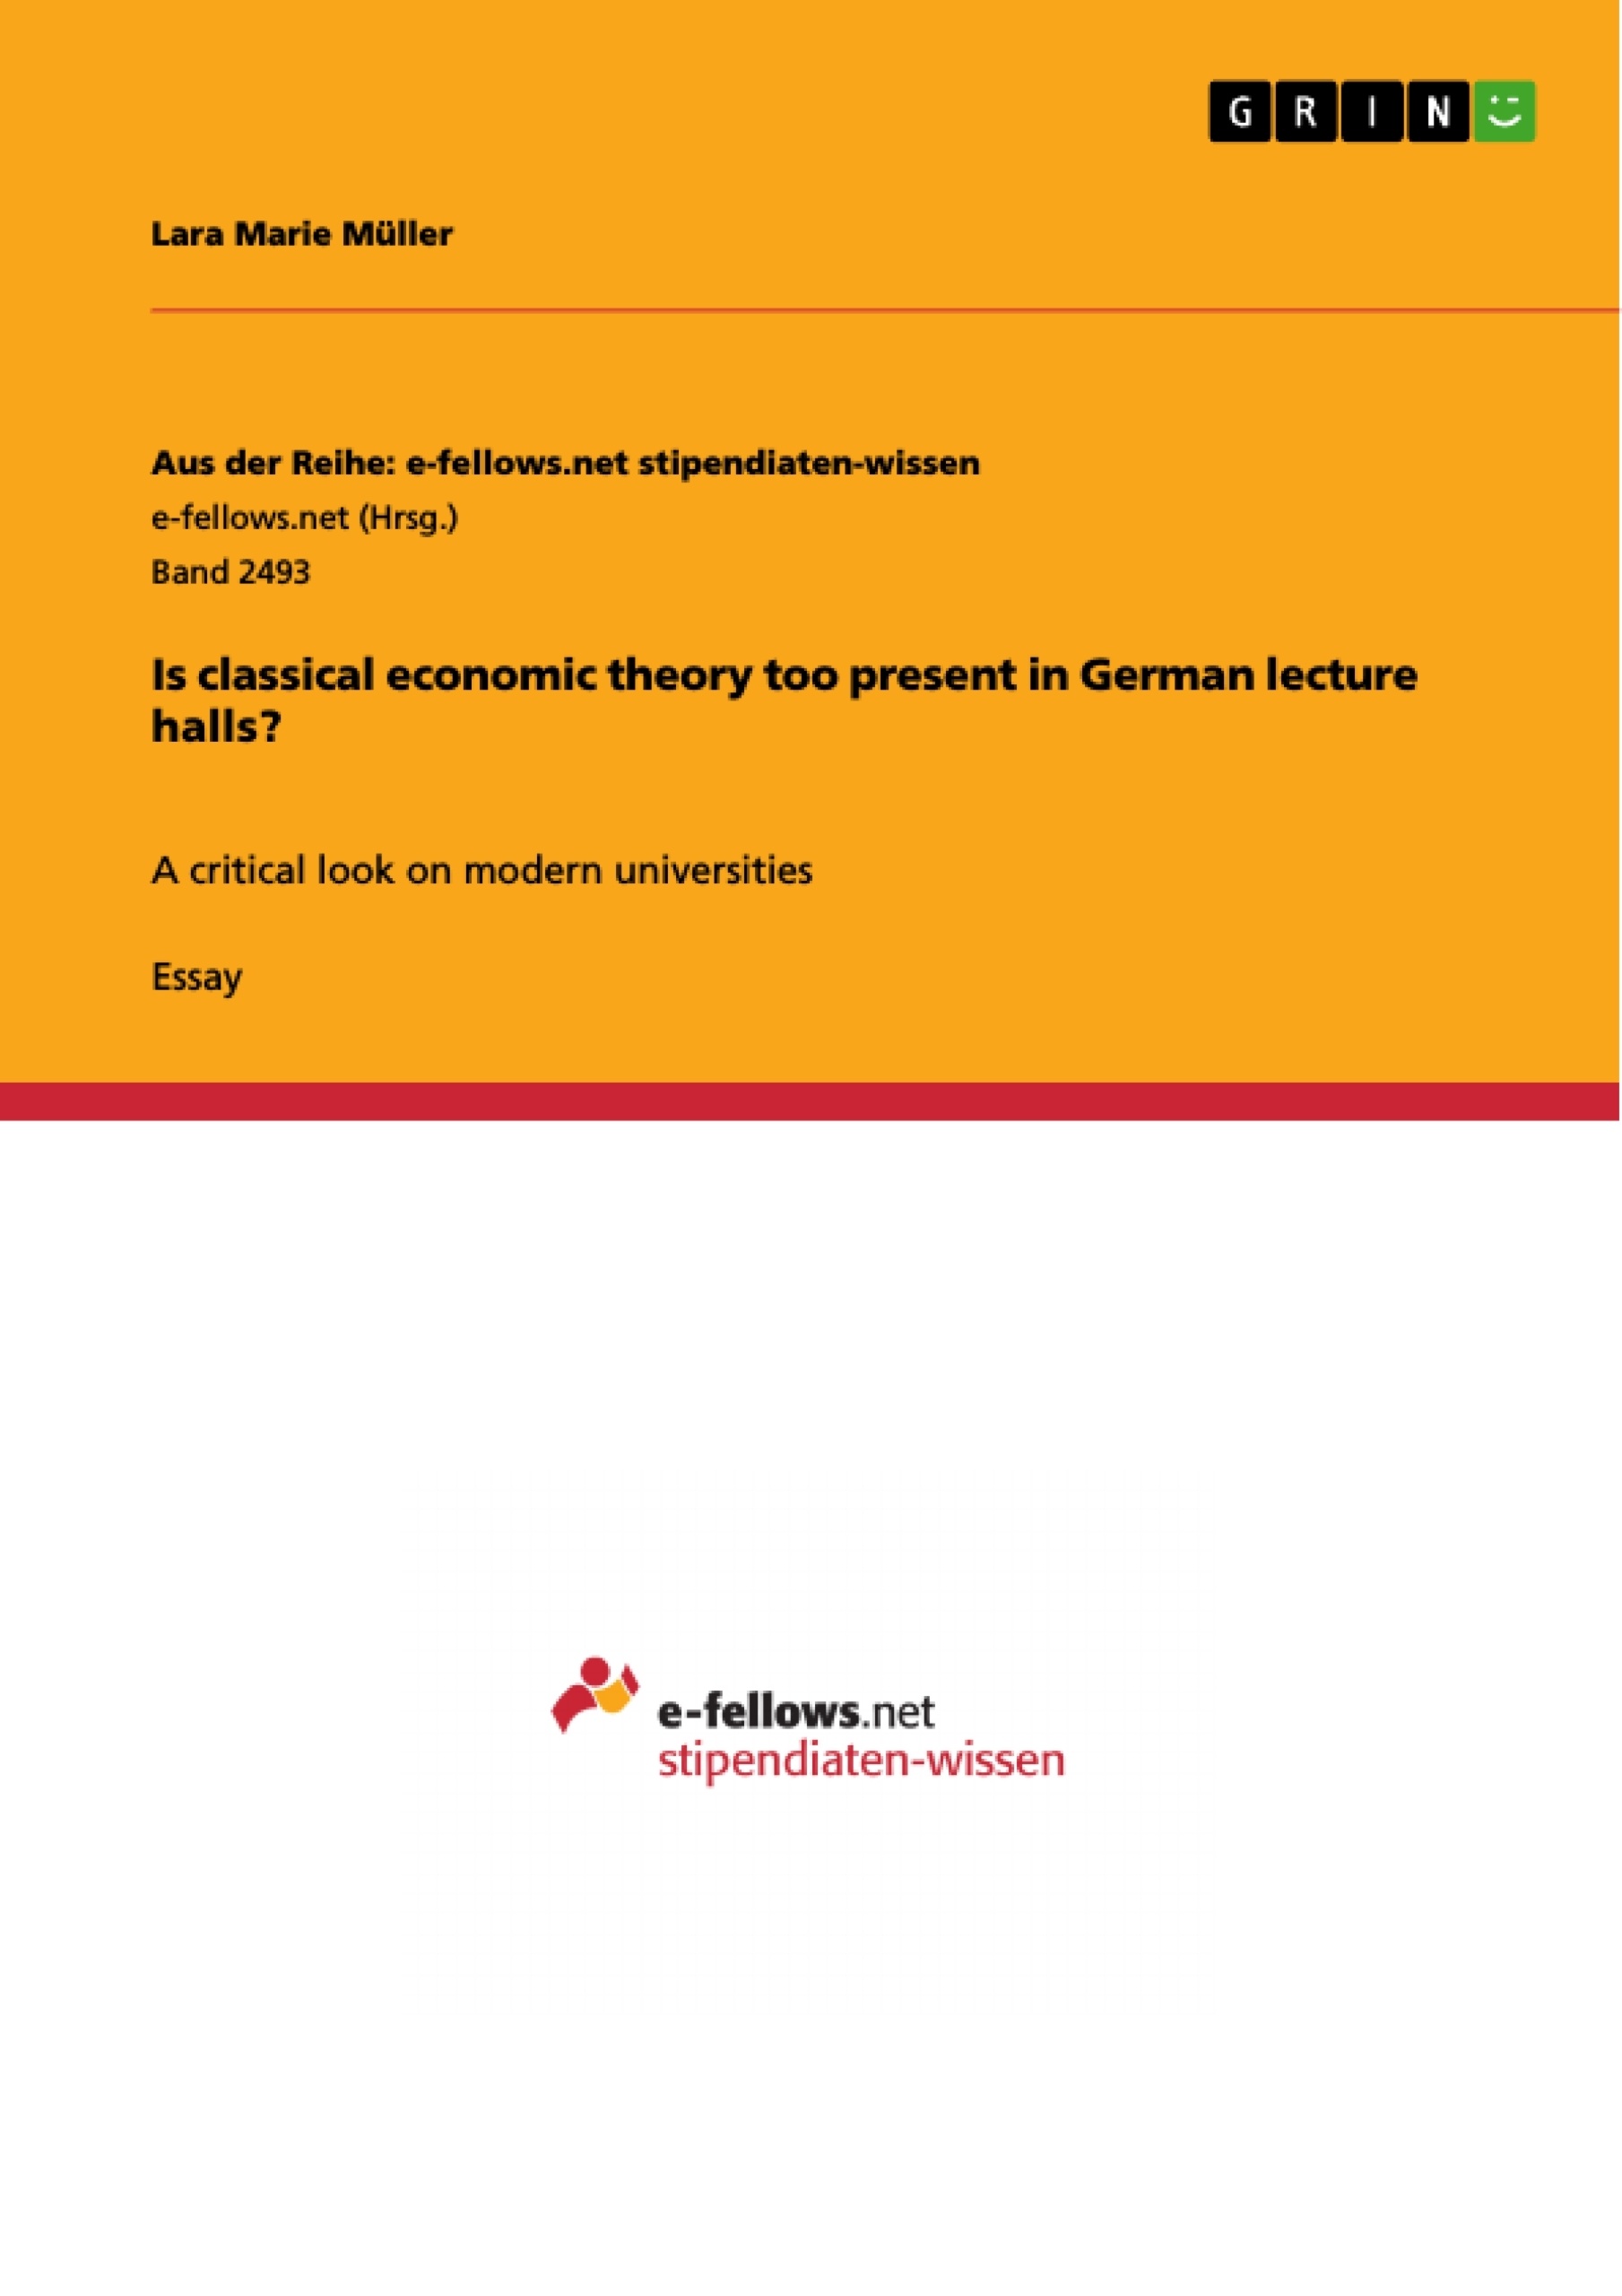 Title: Is classical economic theory too present in German lecture halls?